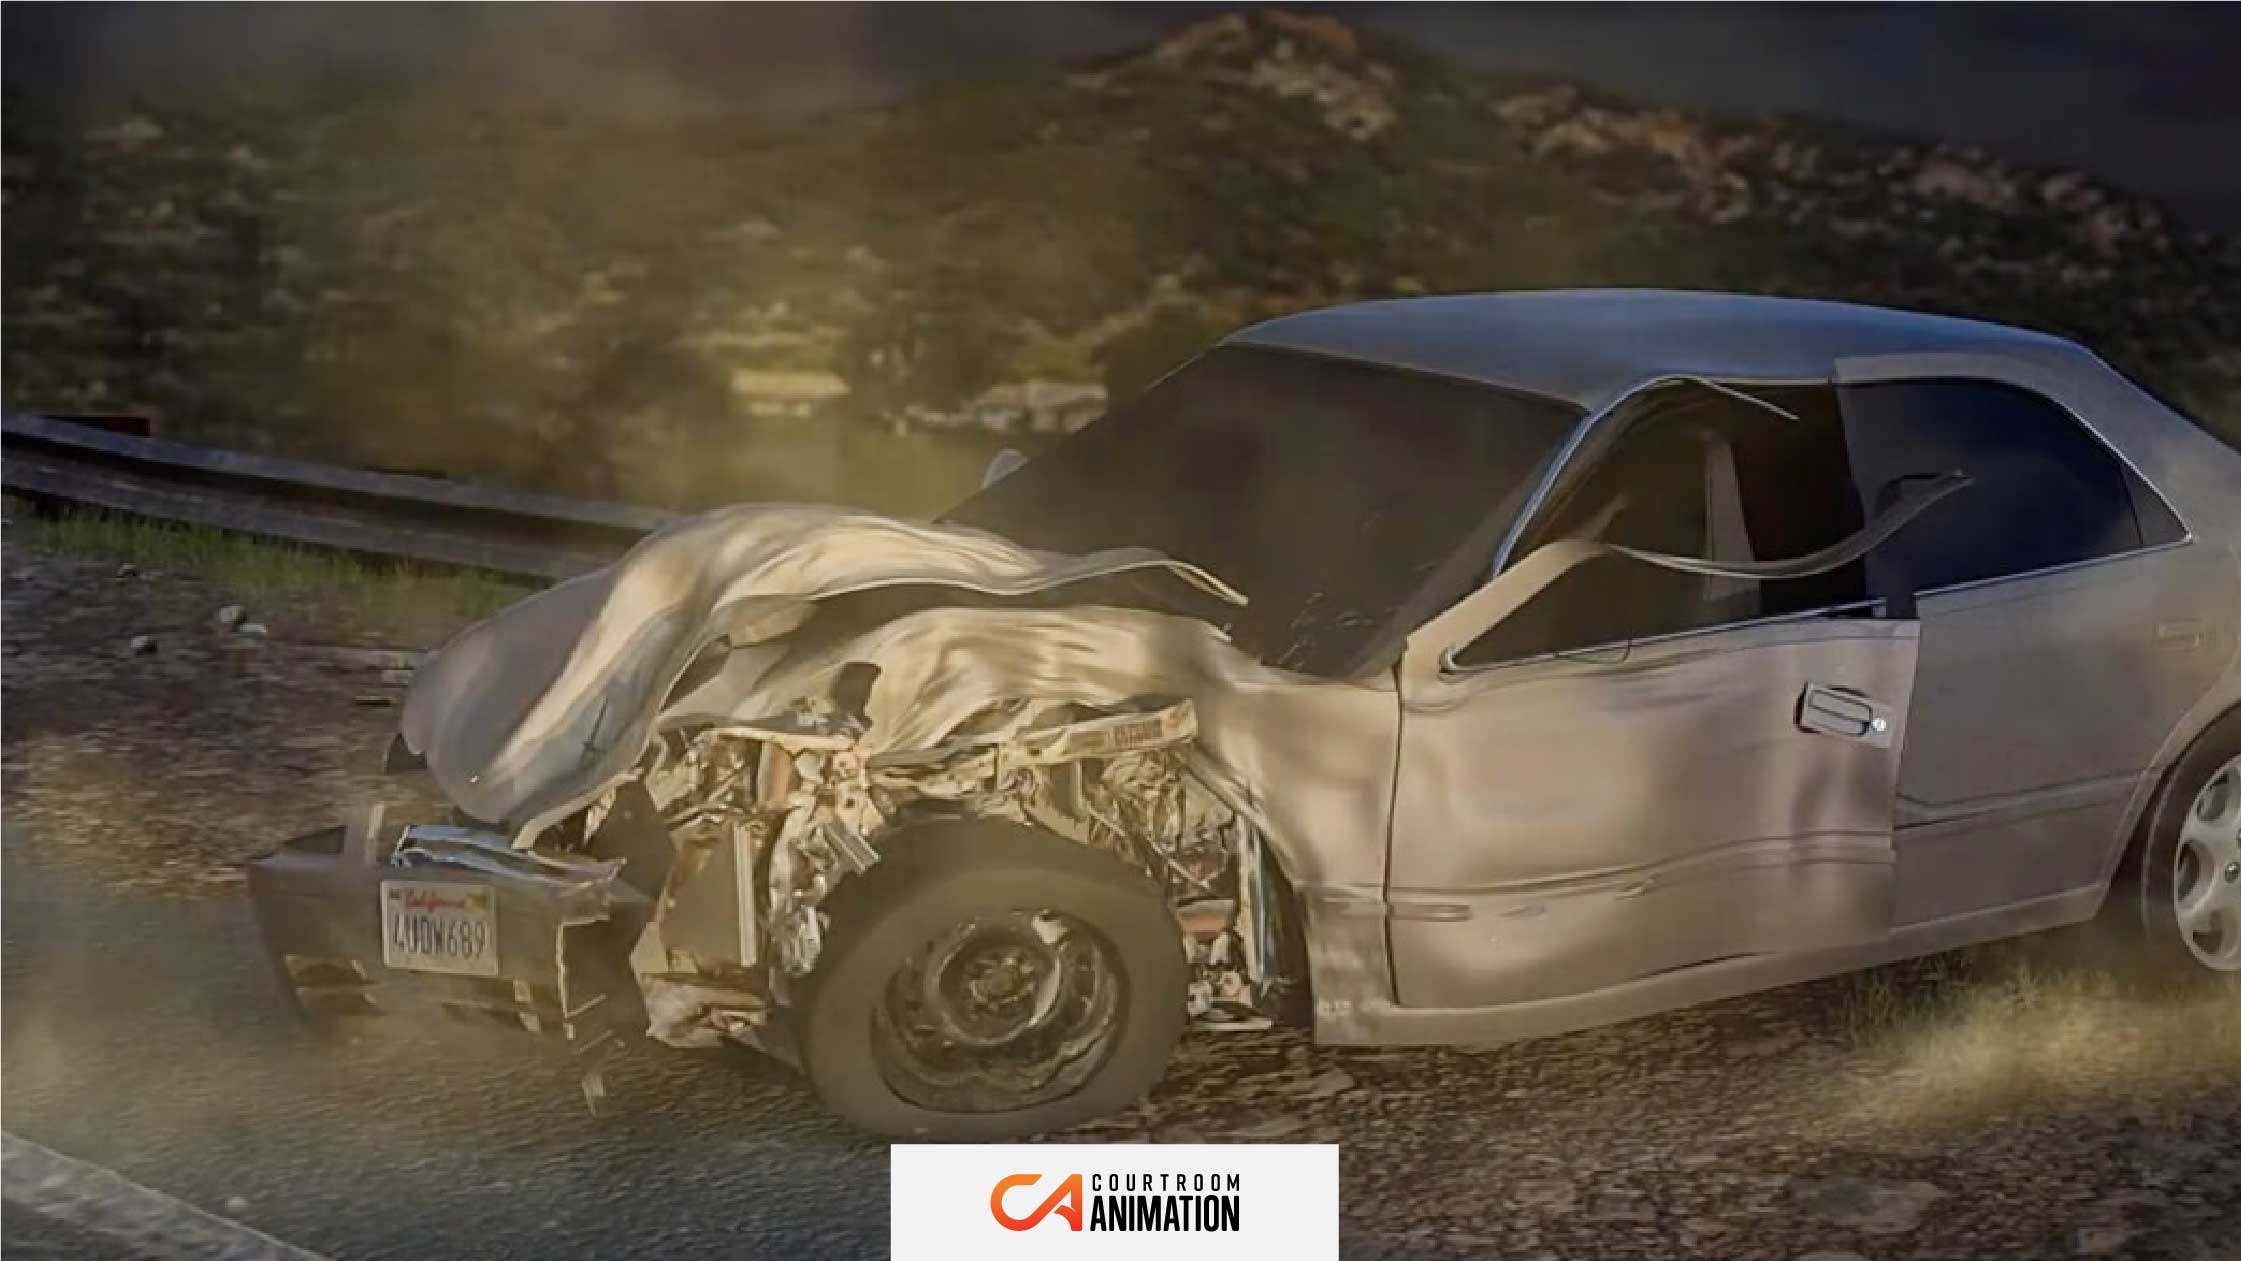 5 Ways a Car Crash Animation Can Win Your Court Case